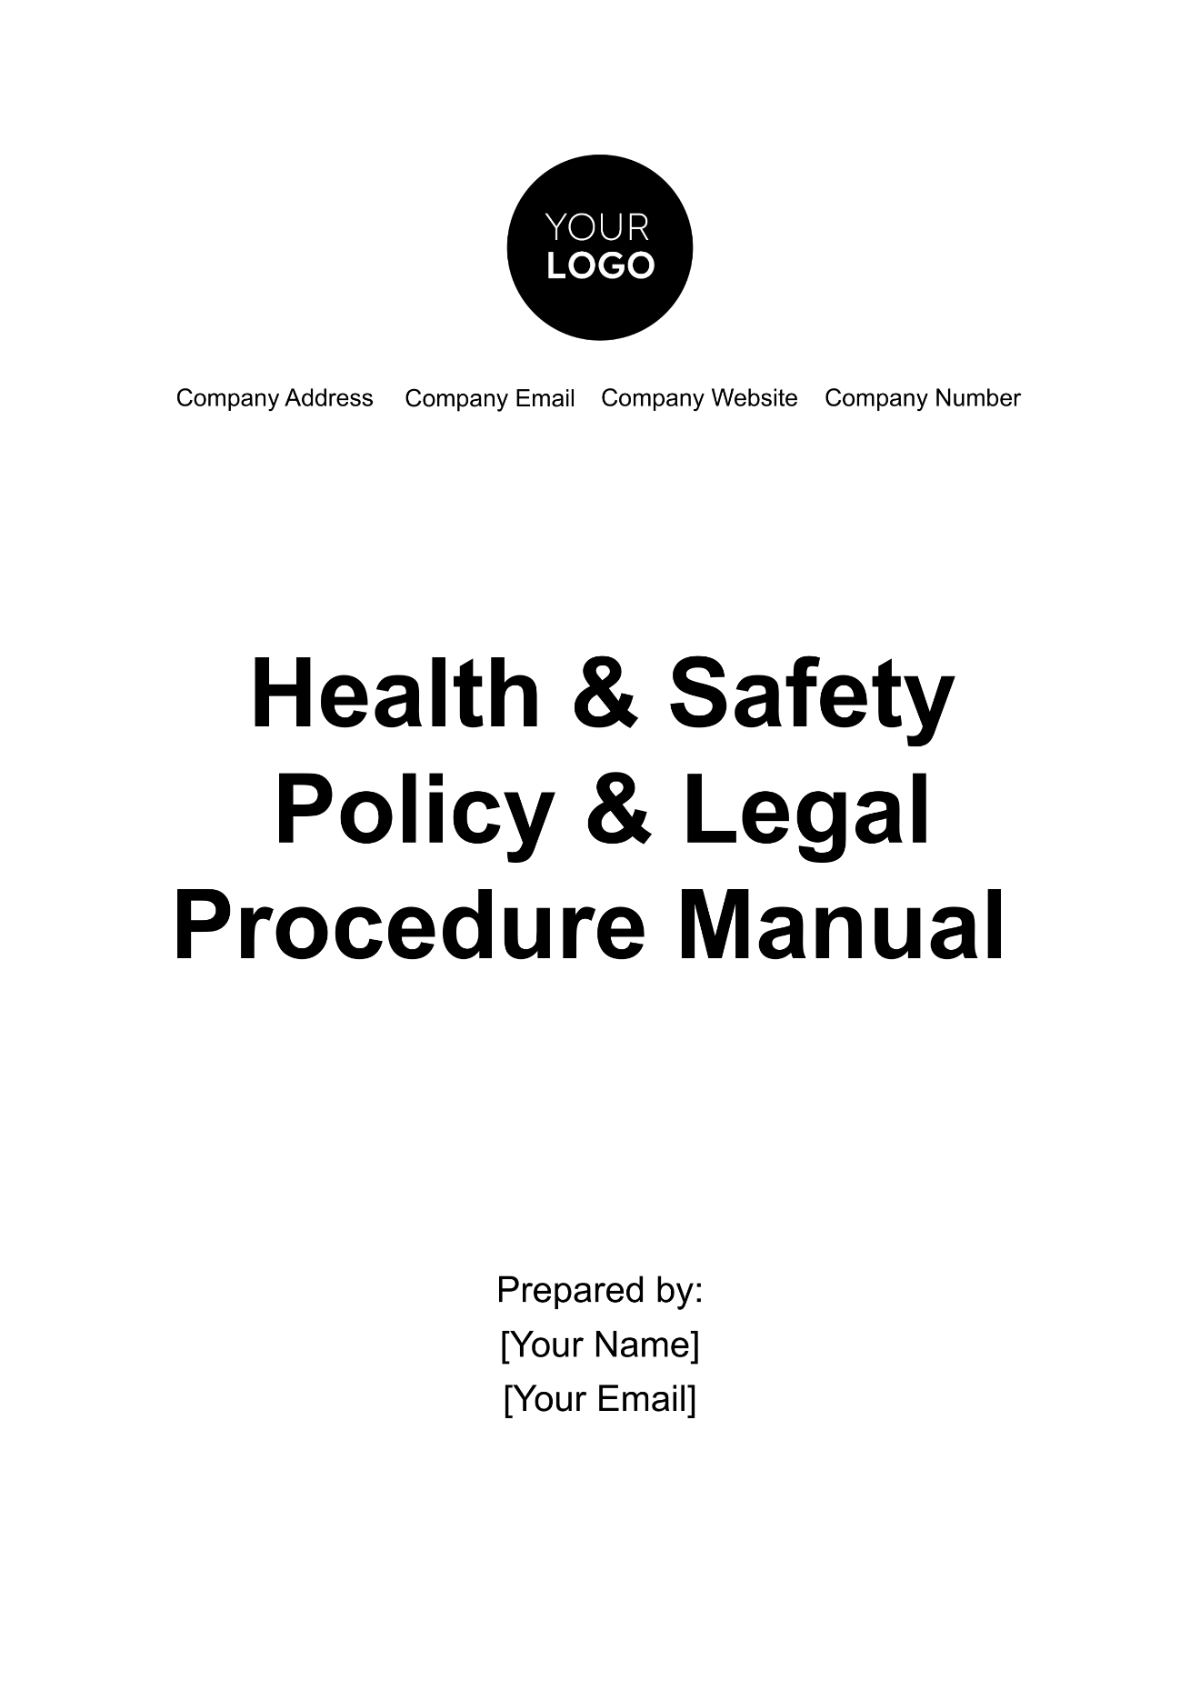 Free Health & Safety Policy & Legal Procedure Manual Template